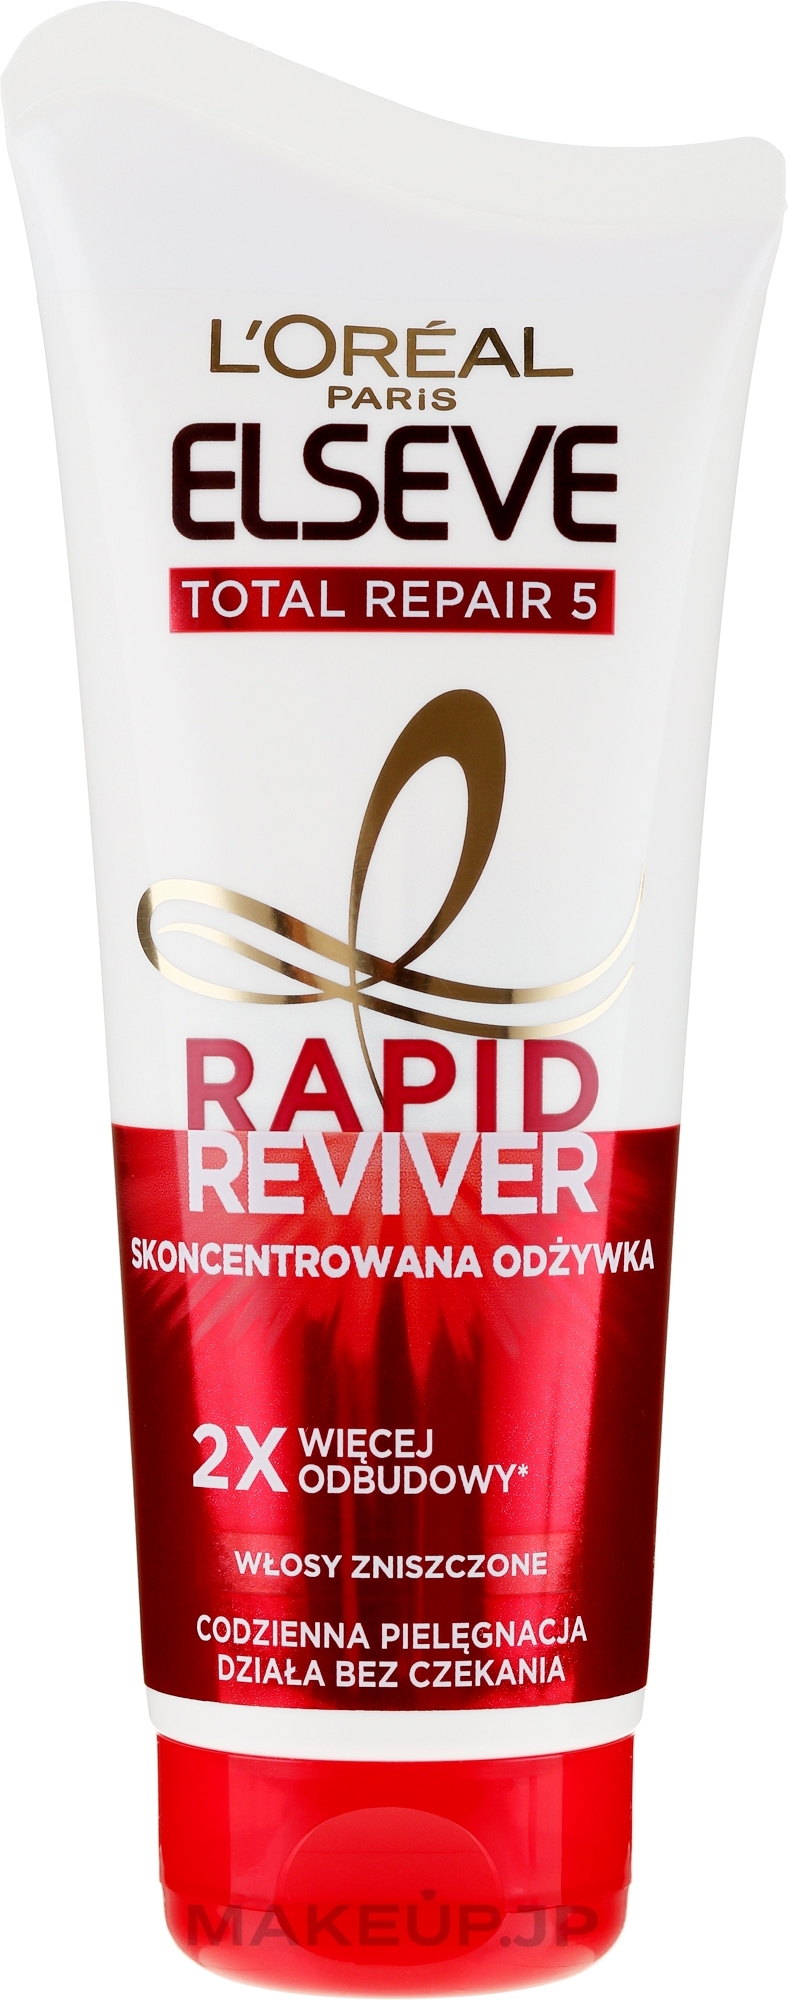 Concentrated Conditioner for Damaged Hair - L'Oreal Paris Elseve Rapid Reviver Total Repair 5  — photo 180 ml